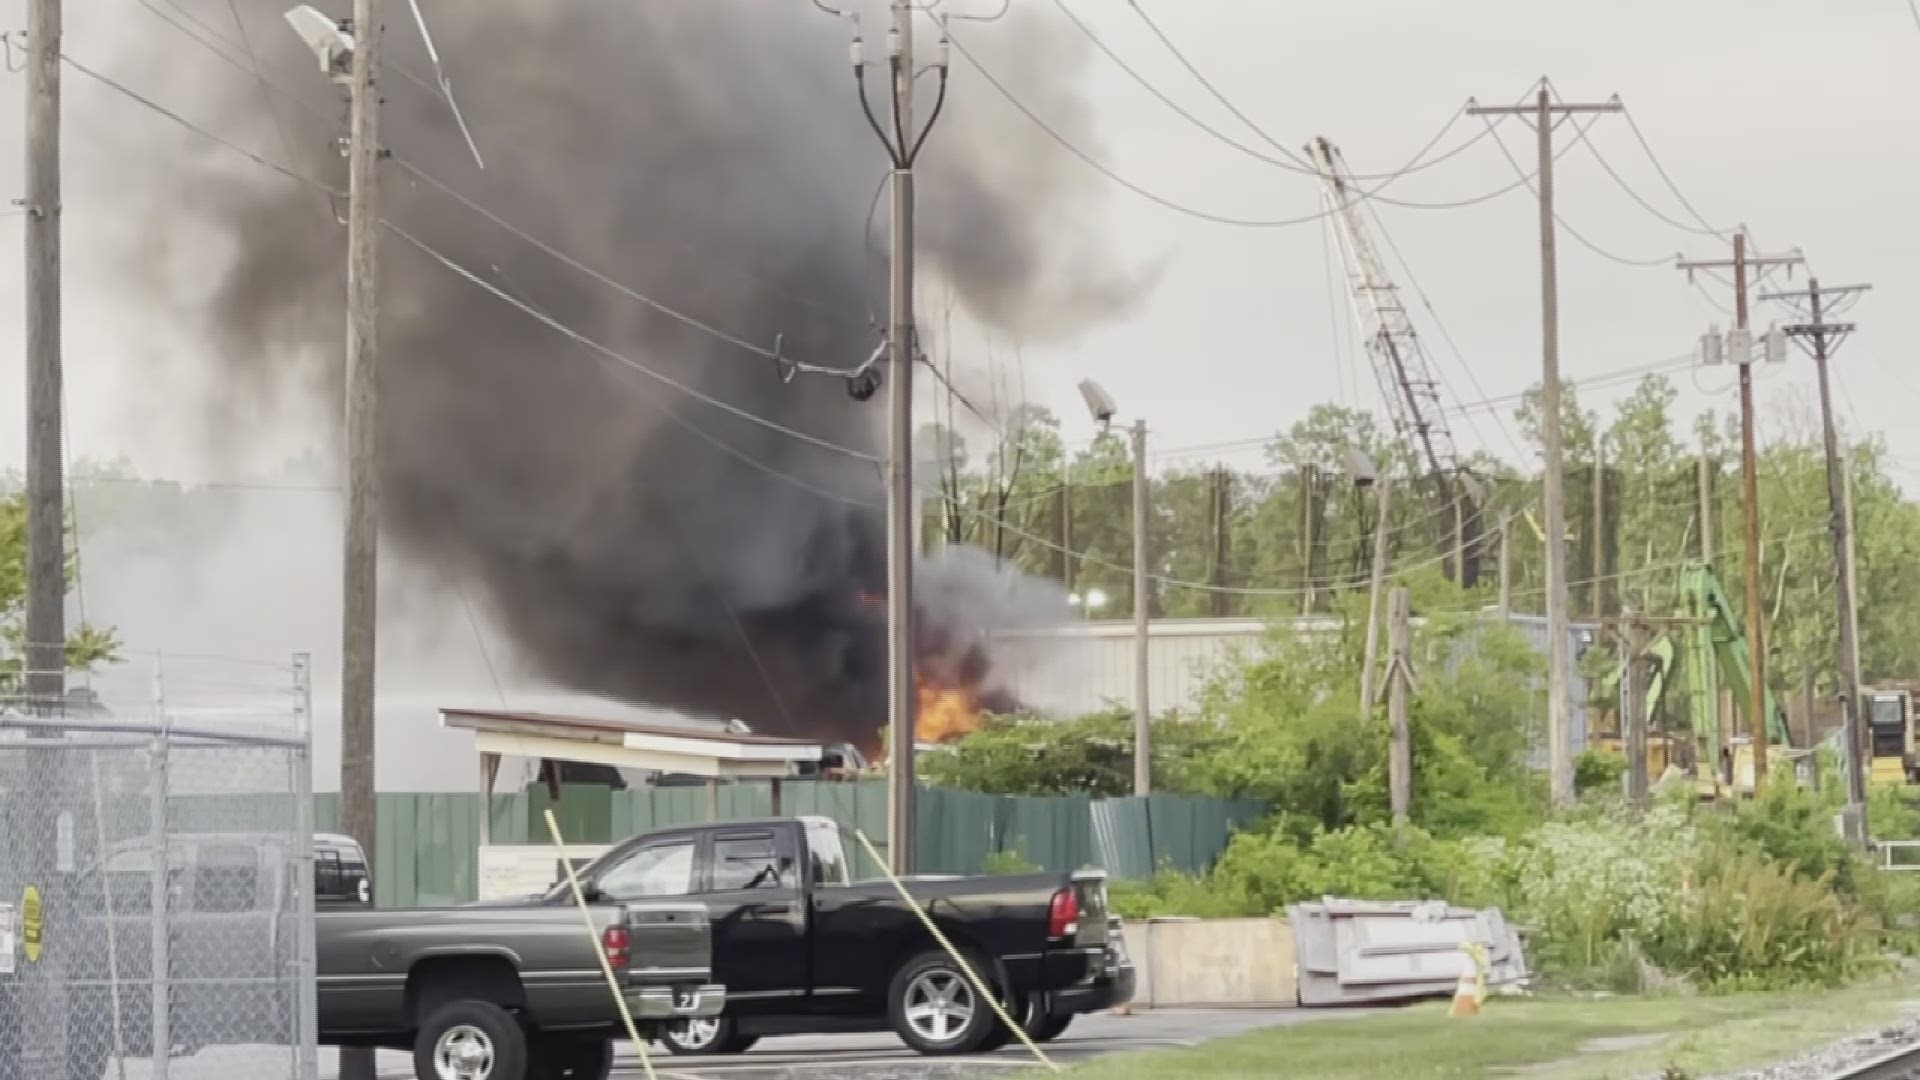 Firefighters battle burning cars and tires at a junkyard near Detroit and Laskey. (Video credit: WTOL 11 viewer)